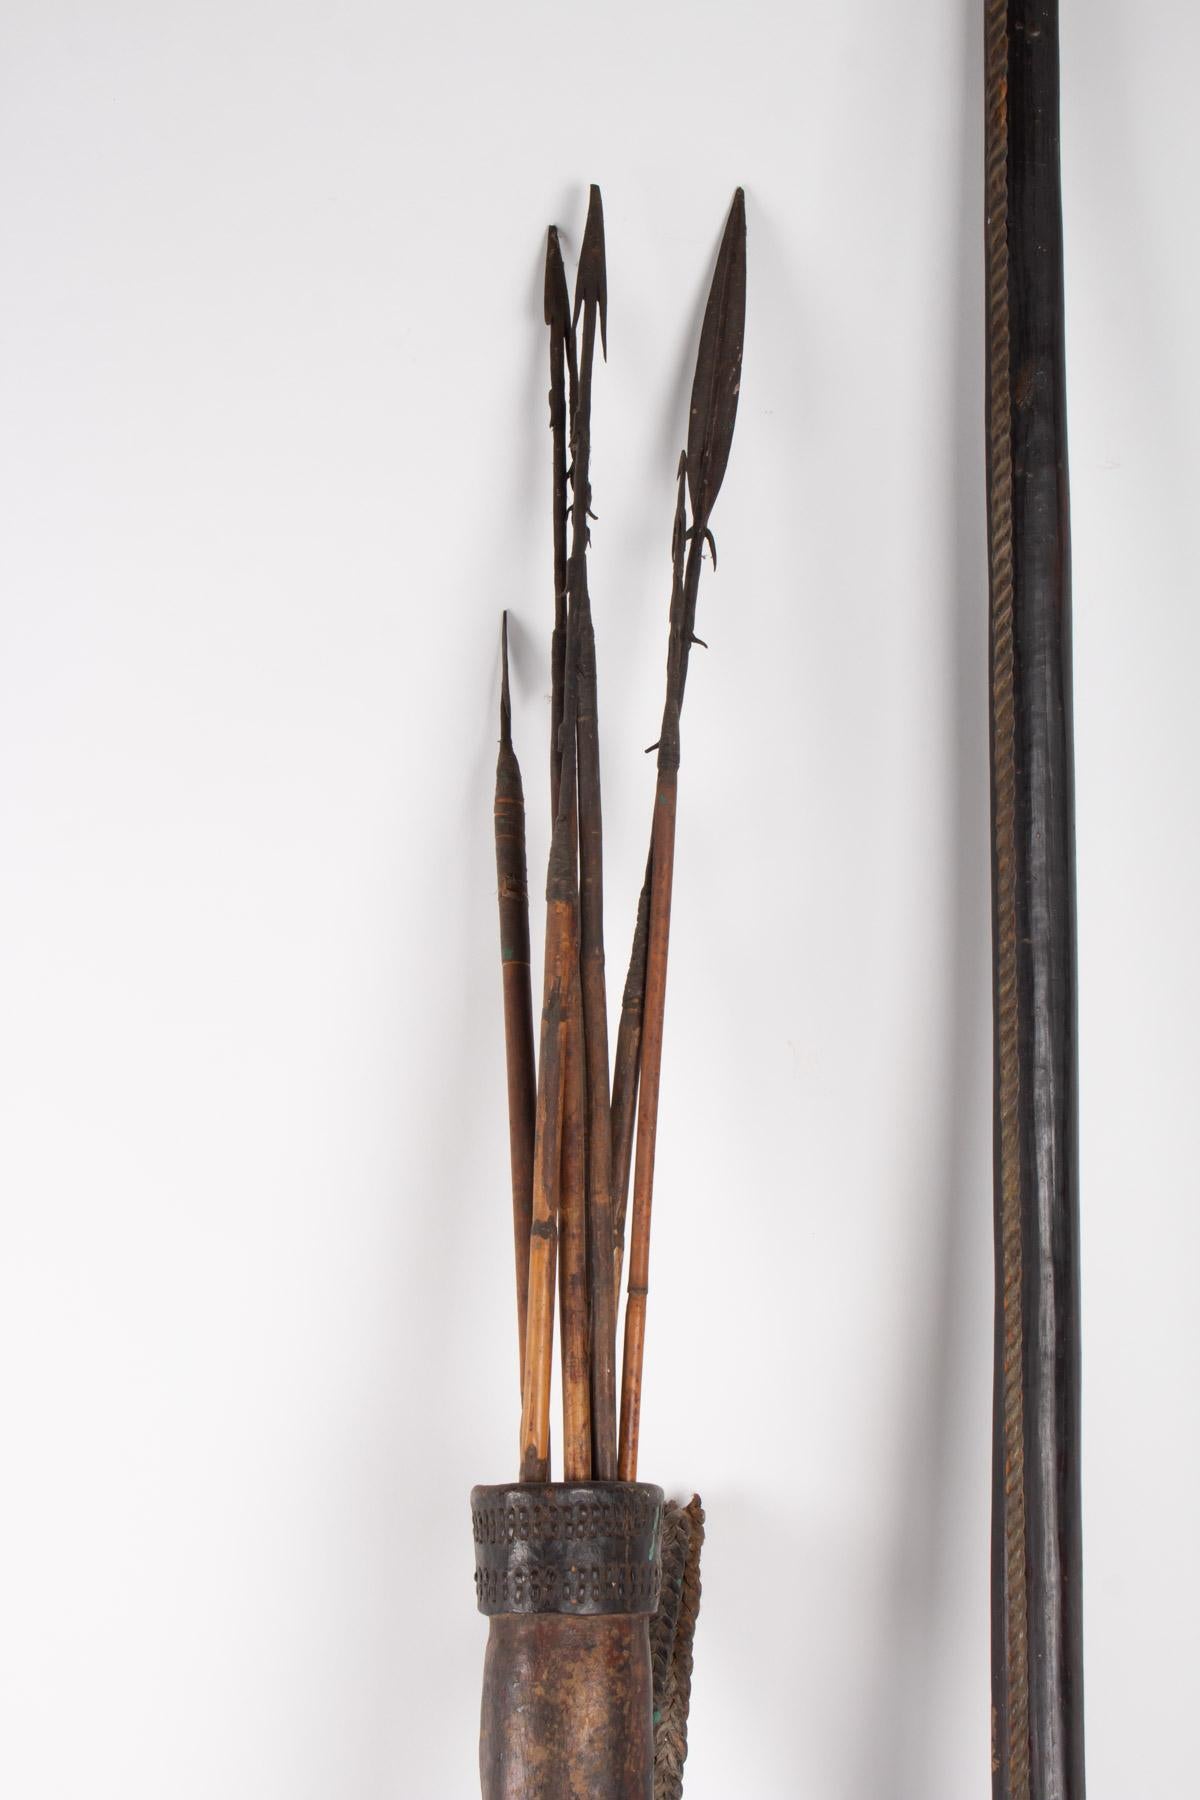 Bow and arrows of South America, antiquity of the 19th century. 6 arrow
Arrows: H 120 cm
Quiver: H 60 cm, D 6 cm.